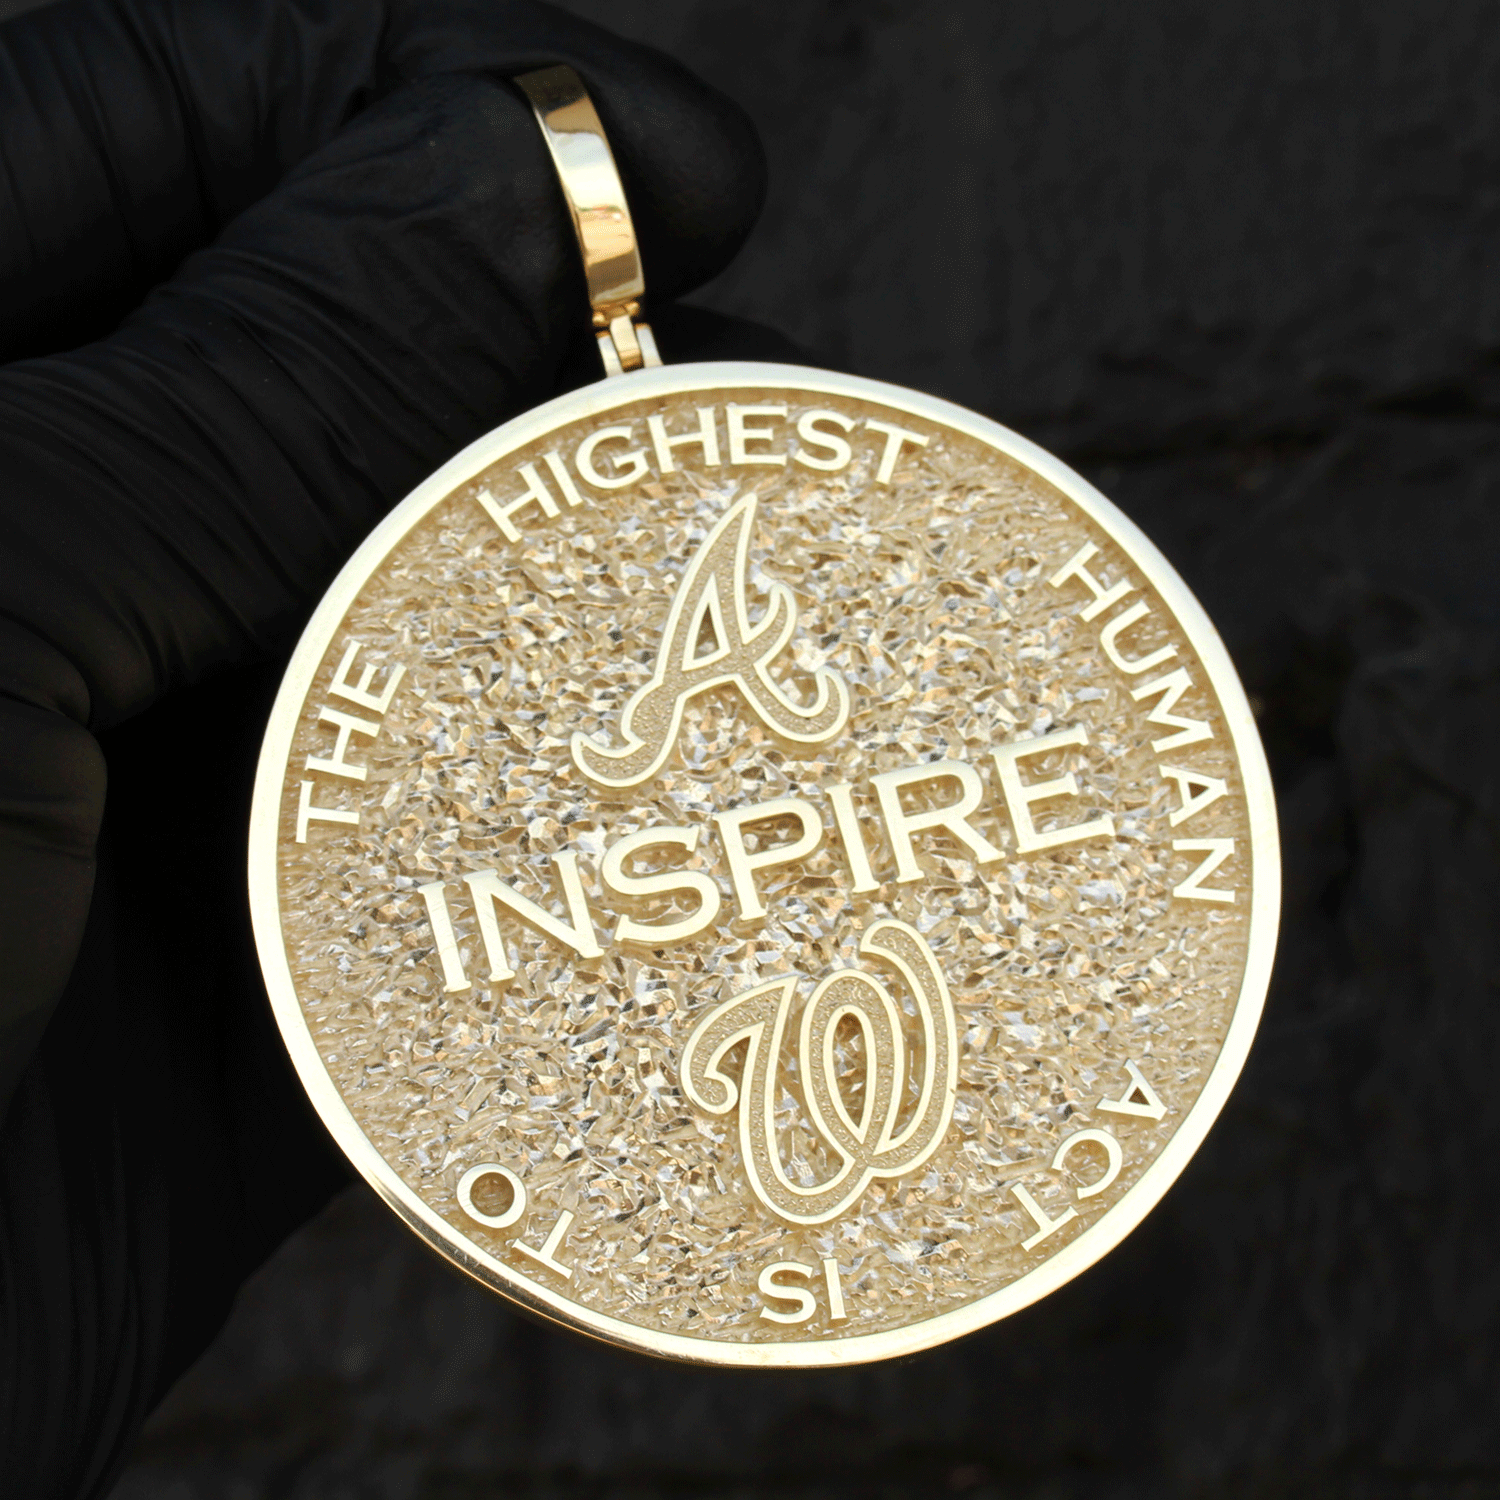 Custom Design Deposit - "The Highest Human Act Is To Inspire" Frosted Pendant